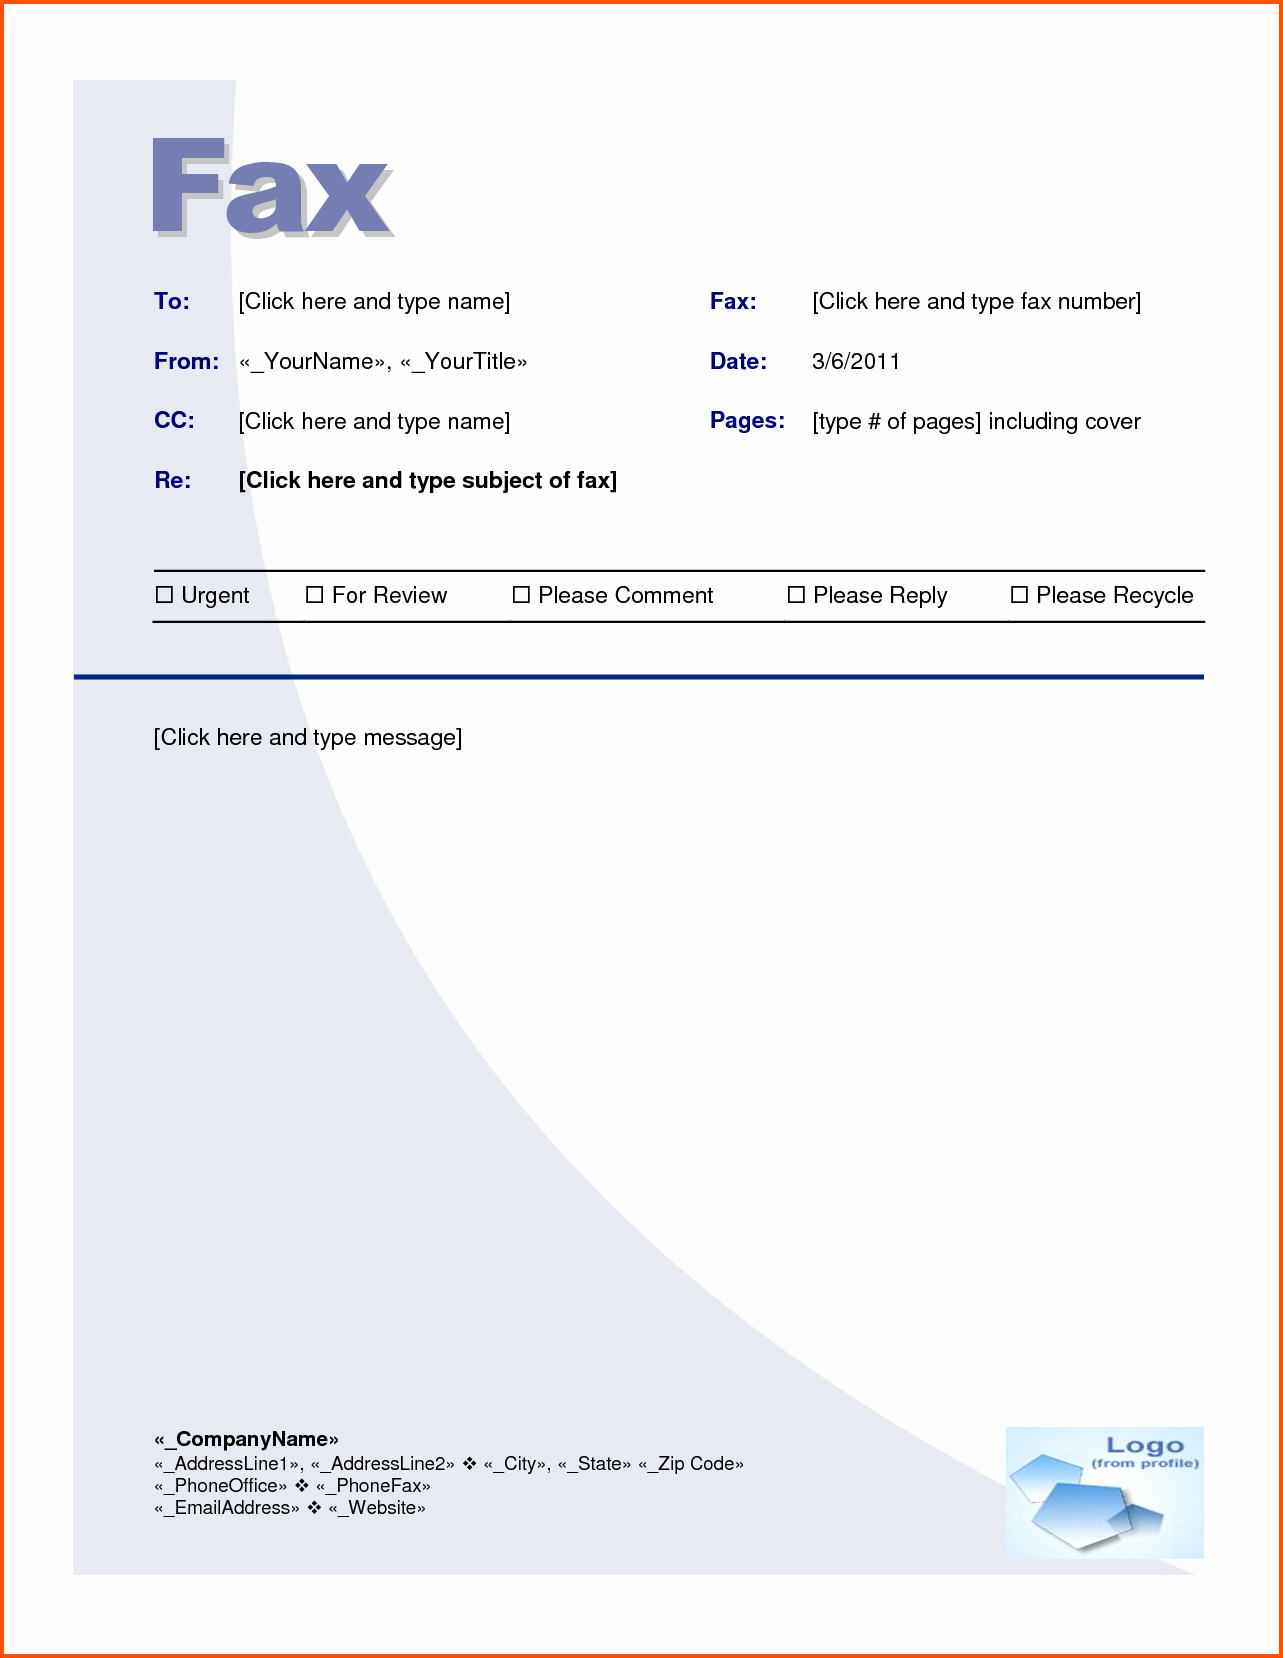 How to Fax Cover Sheet Awesome Microsoft Fice Fax Cover Sheet Template